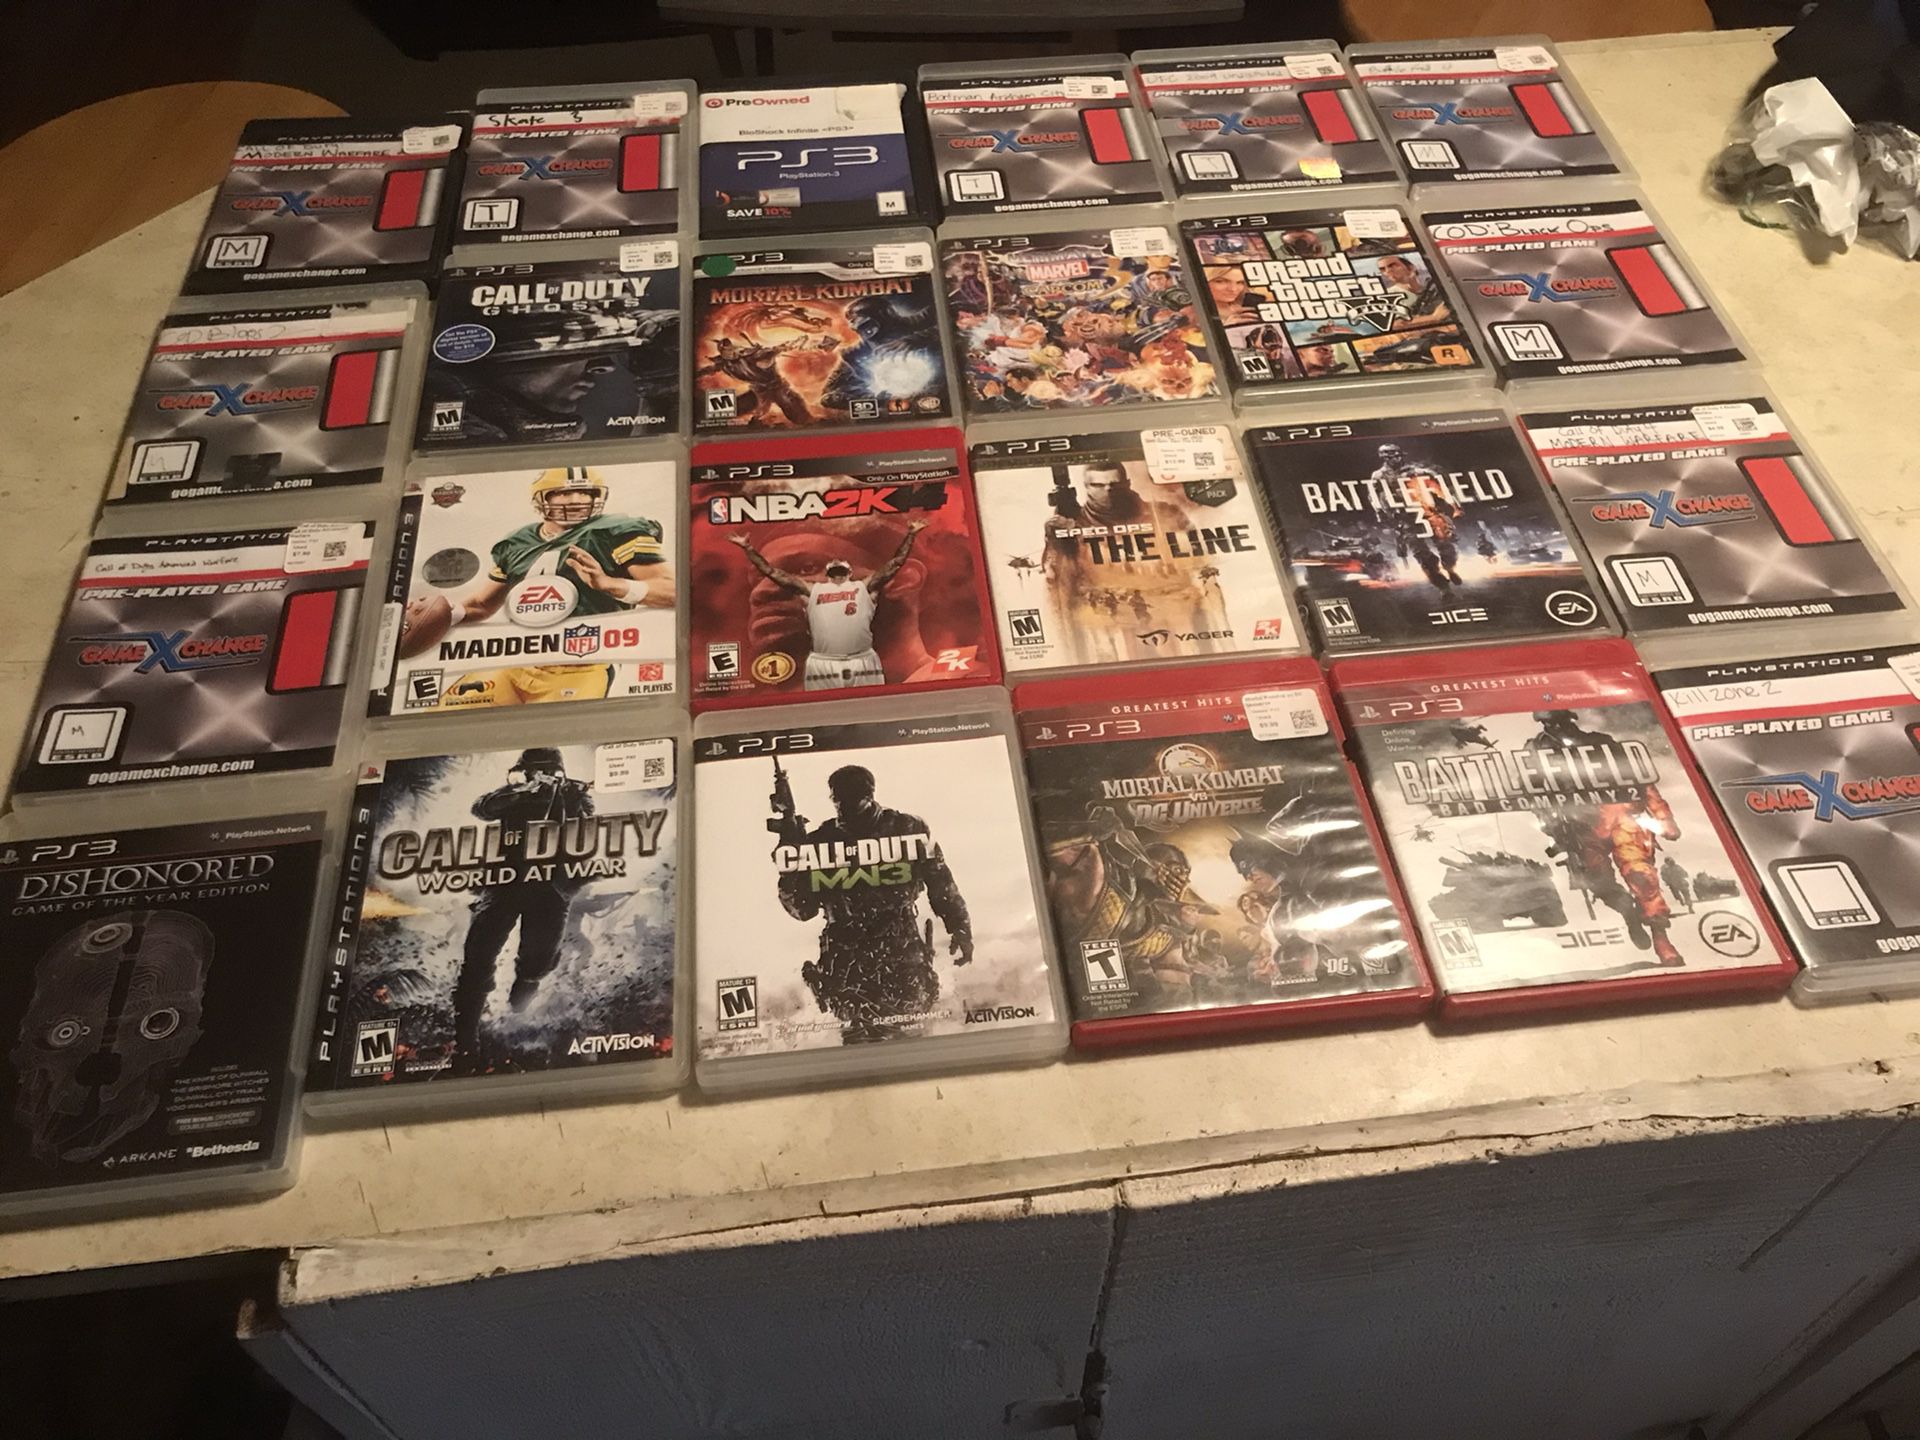 24 Ps3 Games For $100/Will Sell Individually Too